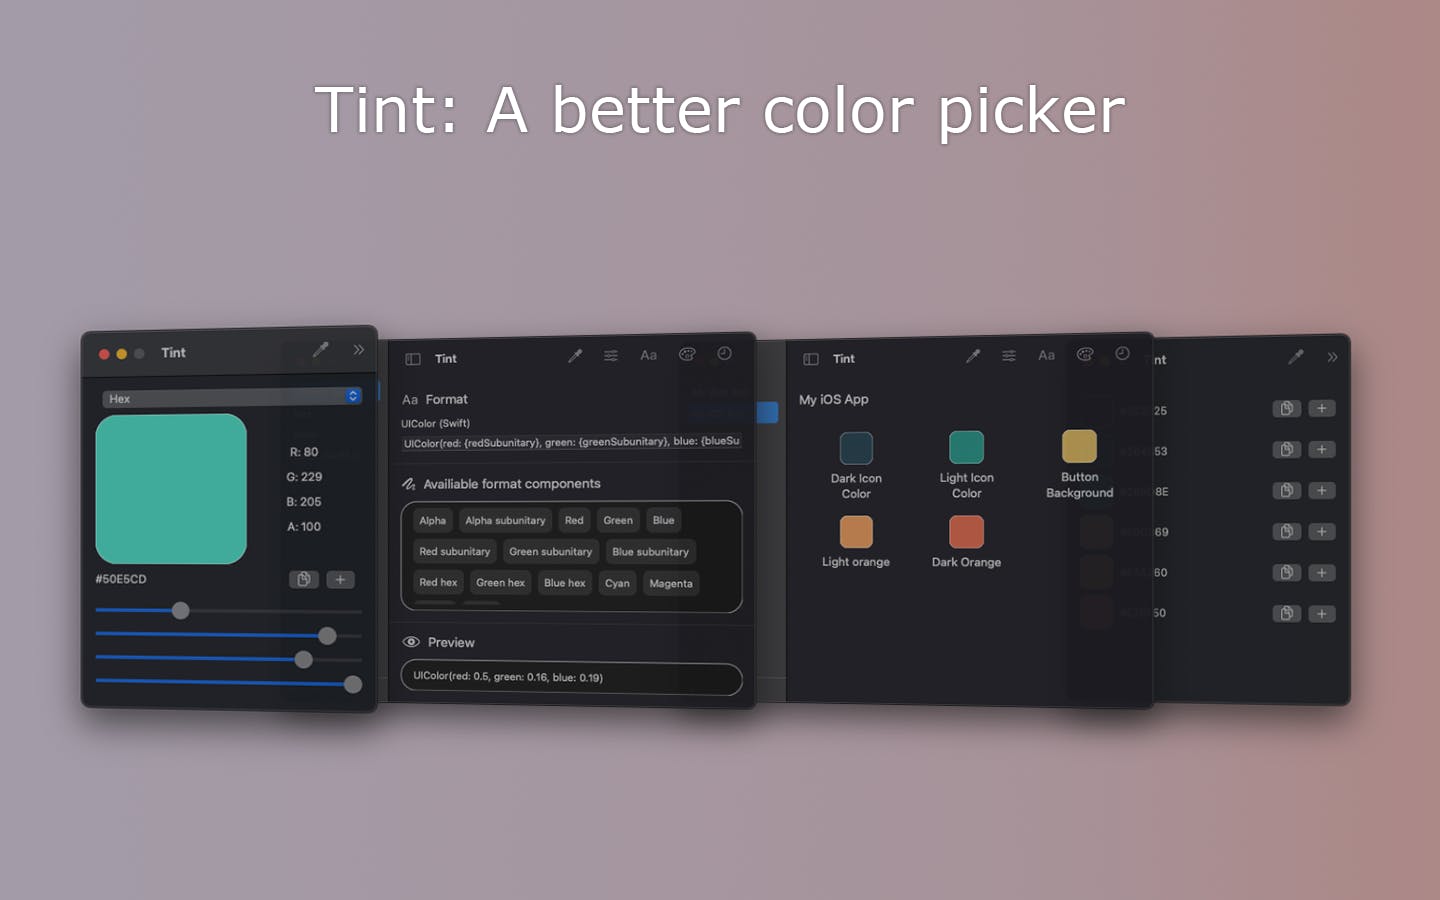 TINT : A better color picker